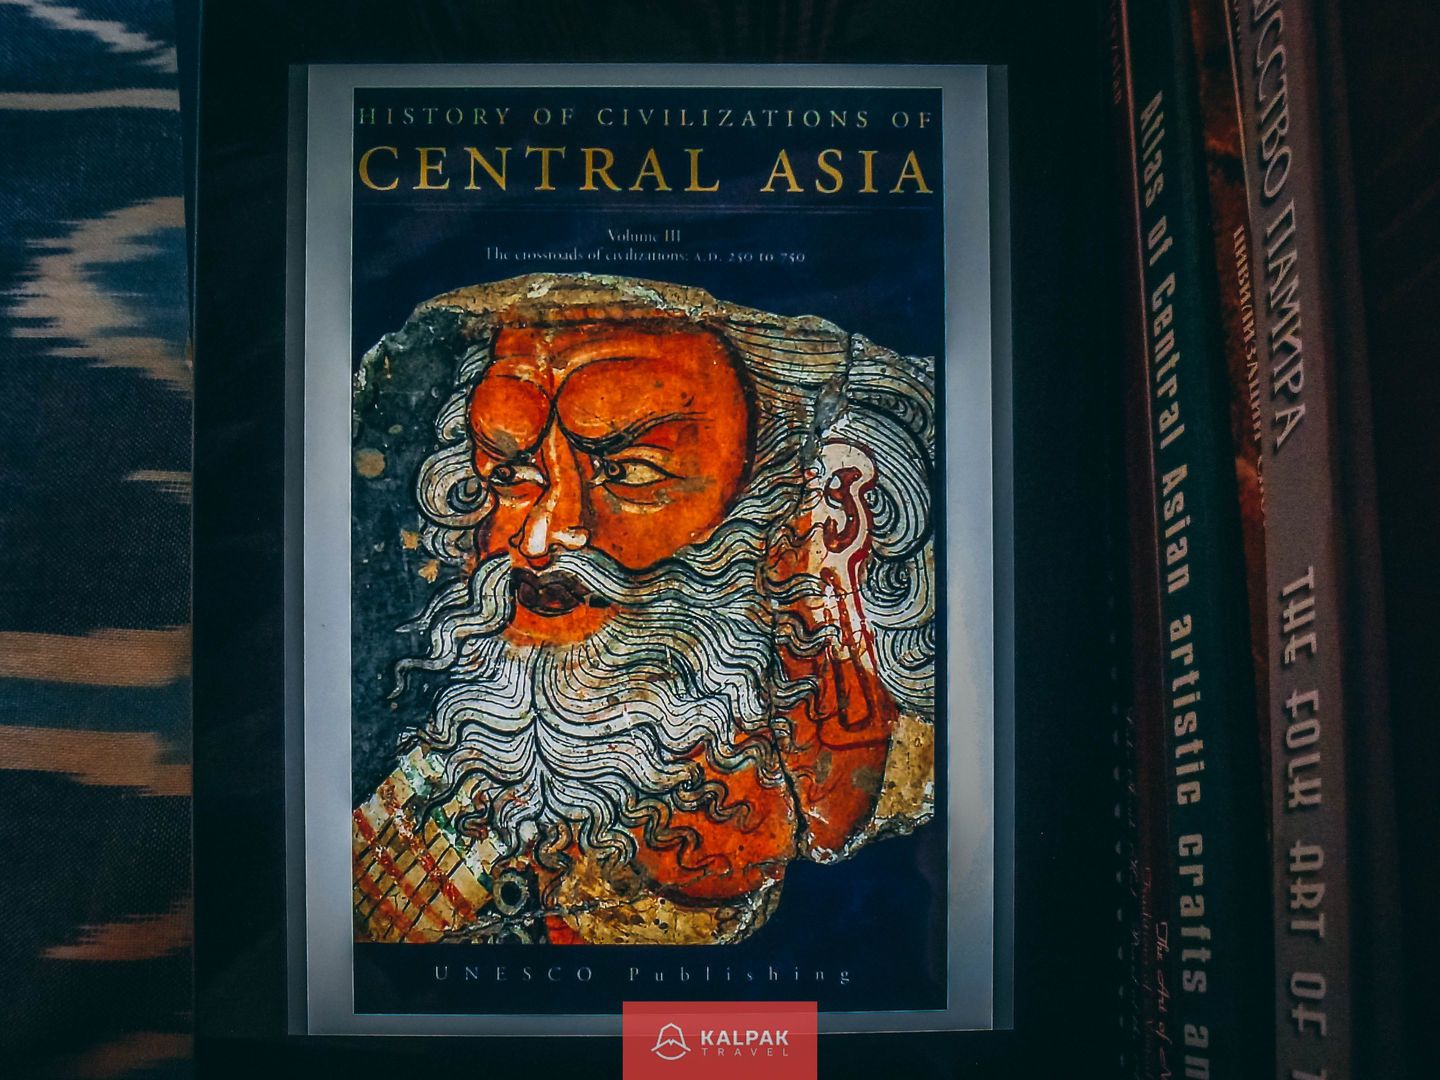 Central Asia political history books